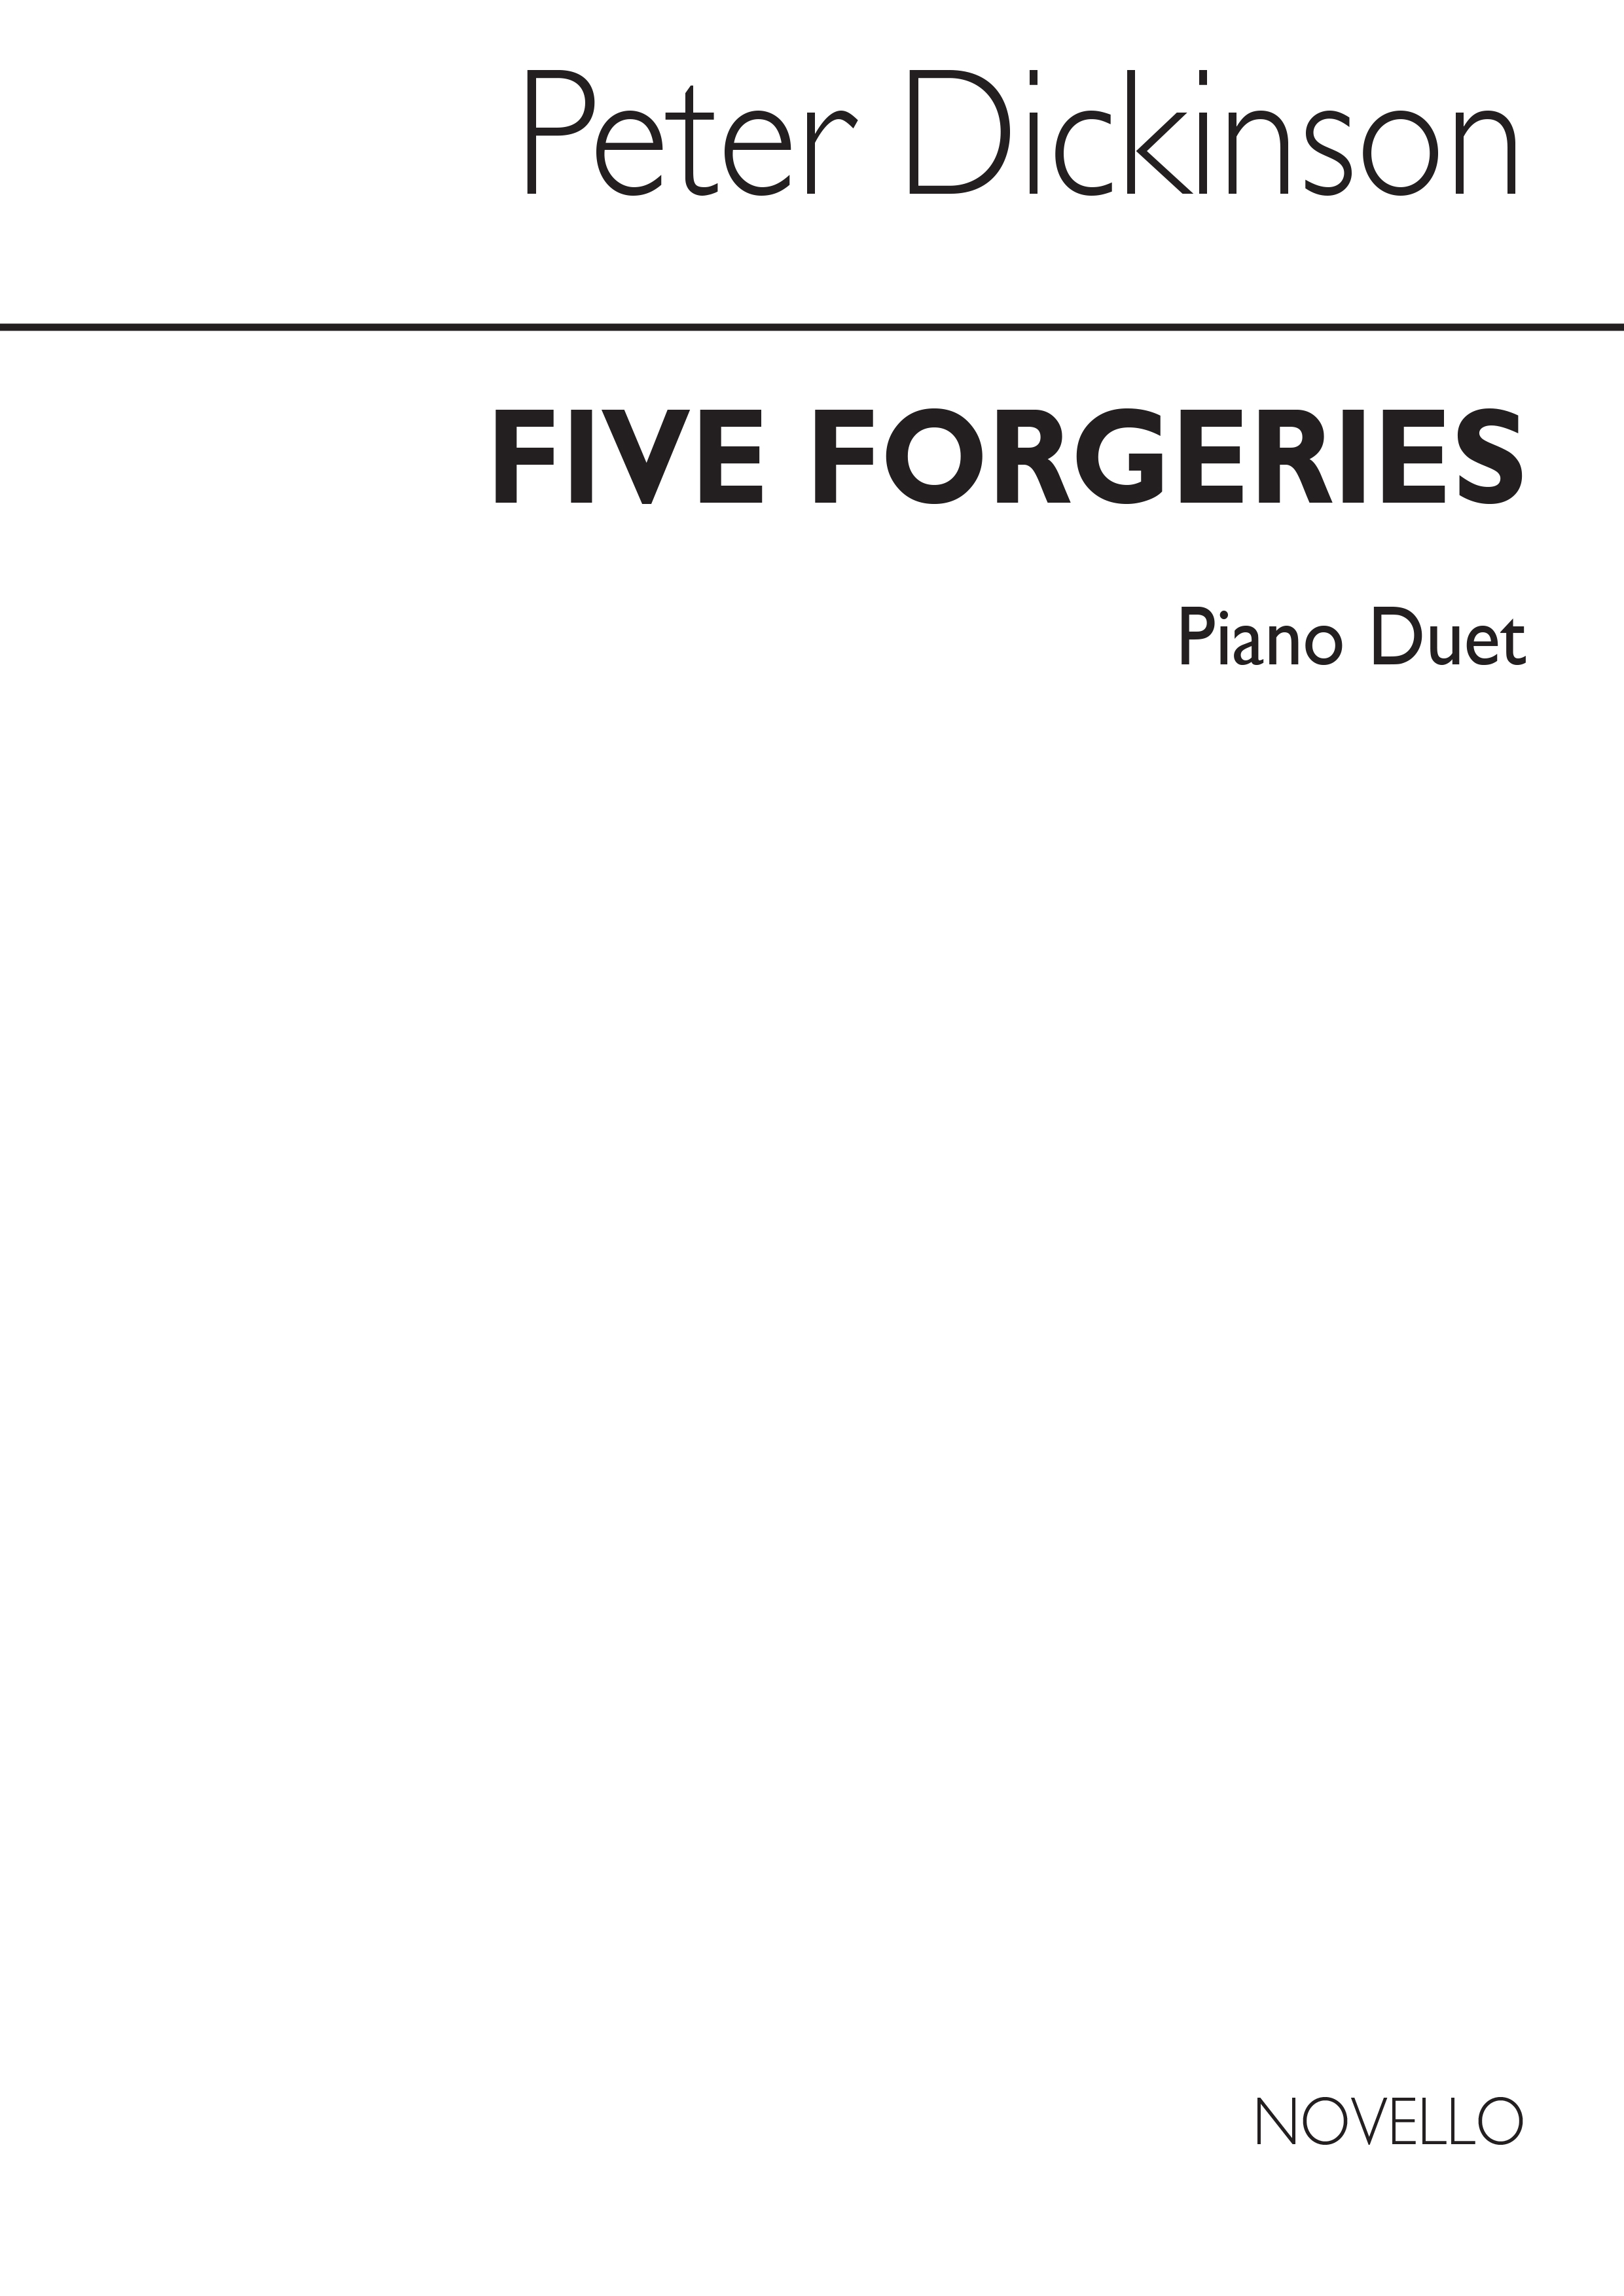 Peter Dickinson: Five Forgeries For Piano Duet